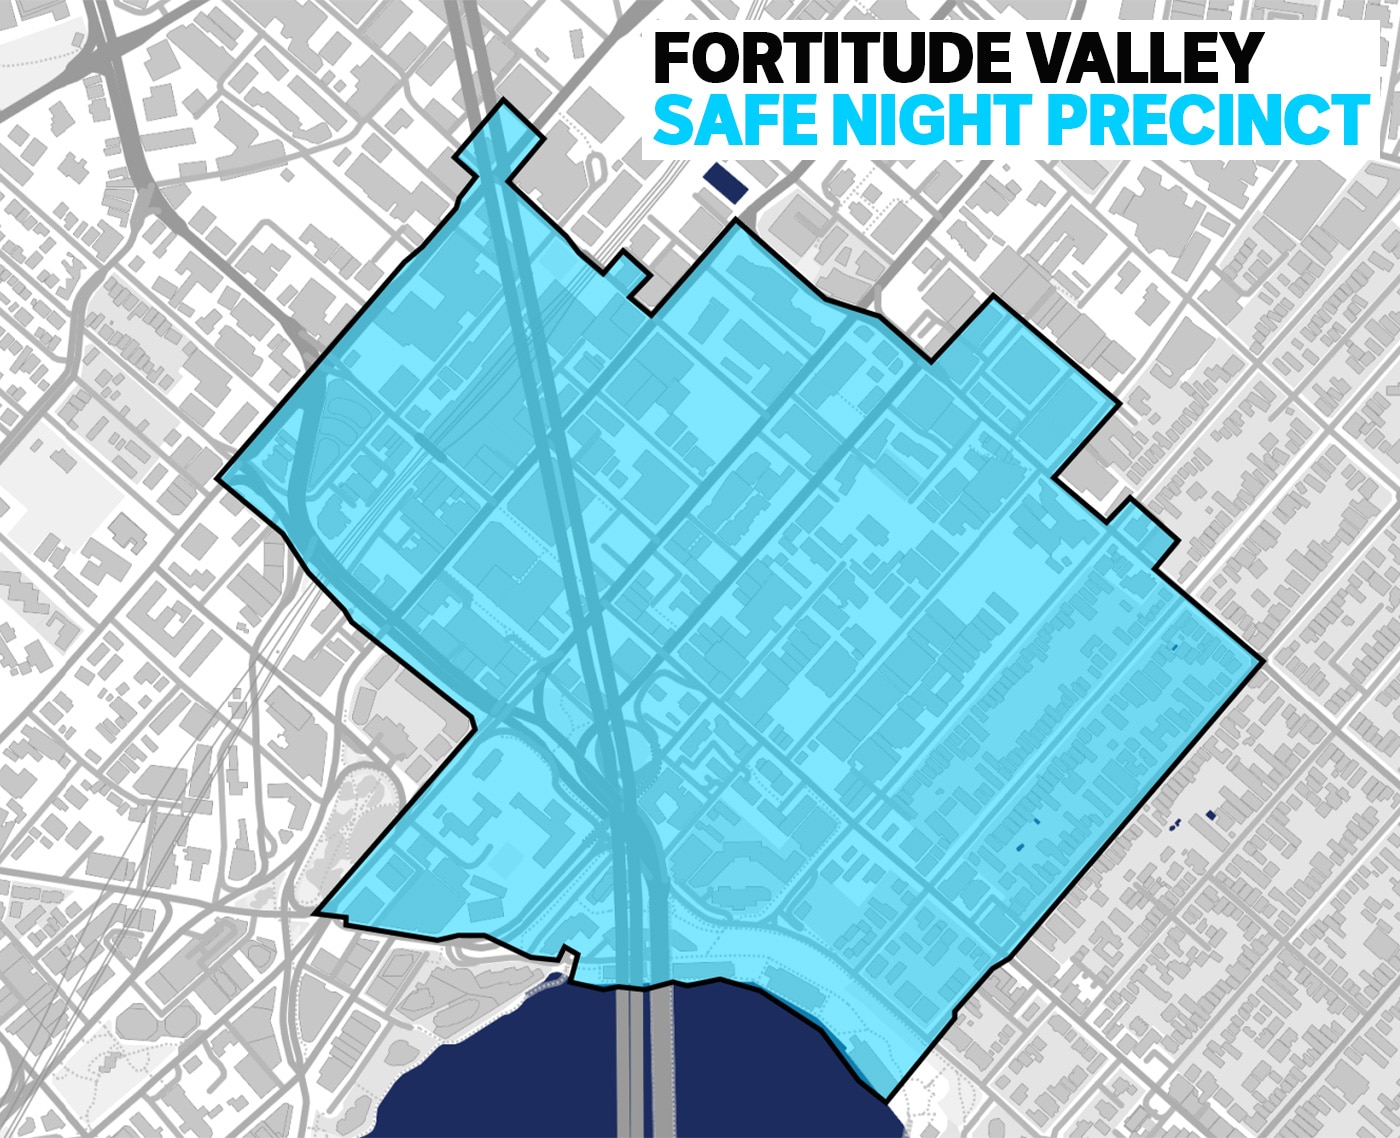 A map of the Fortitude Valley safe night precinct